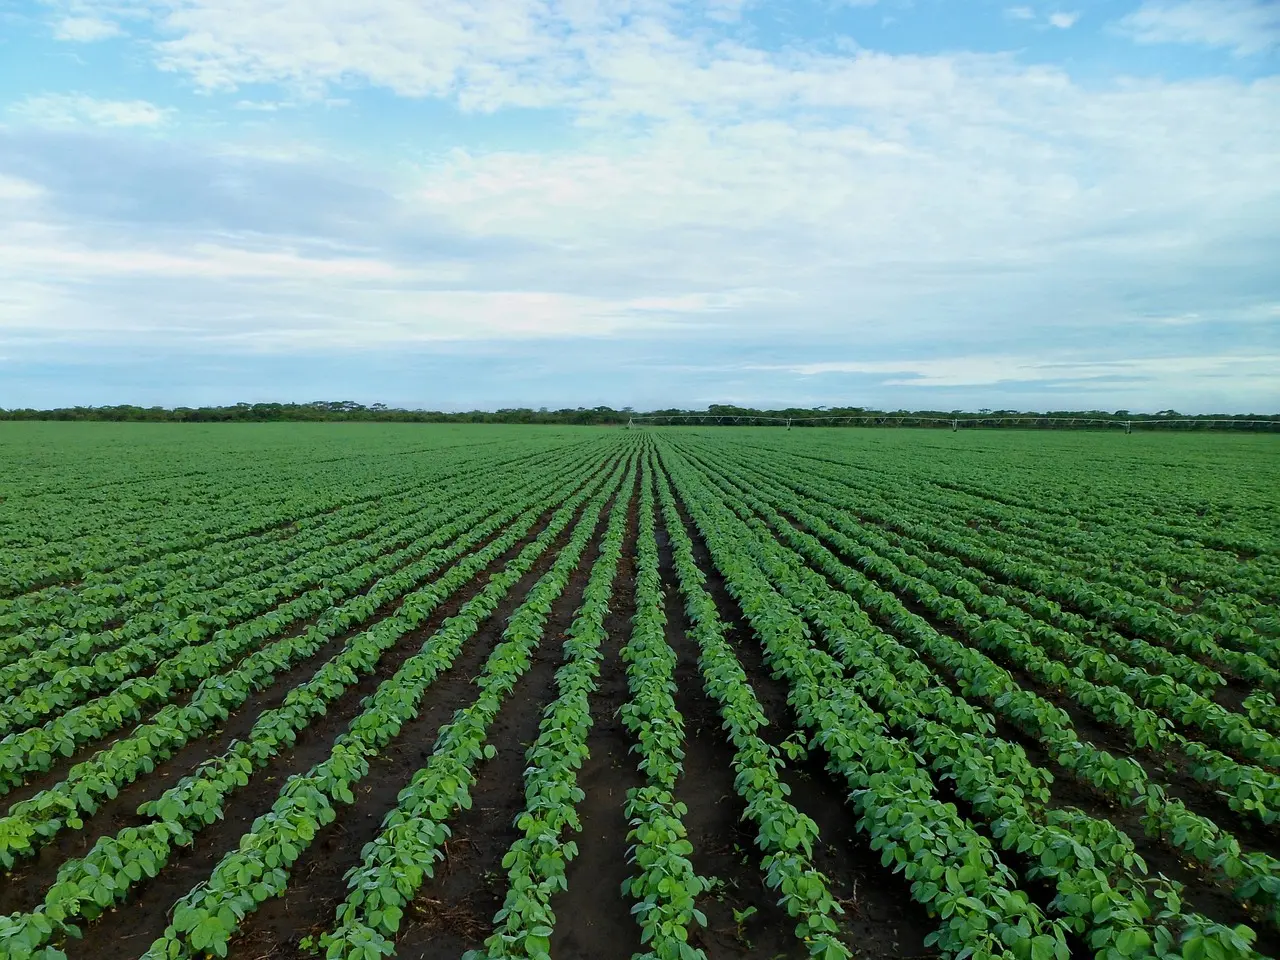 Soybean field in the summer with bright green plants